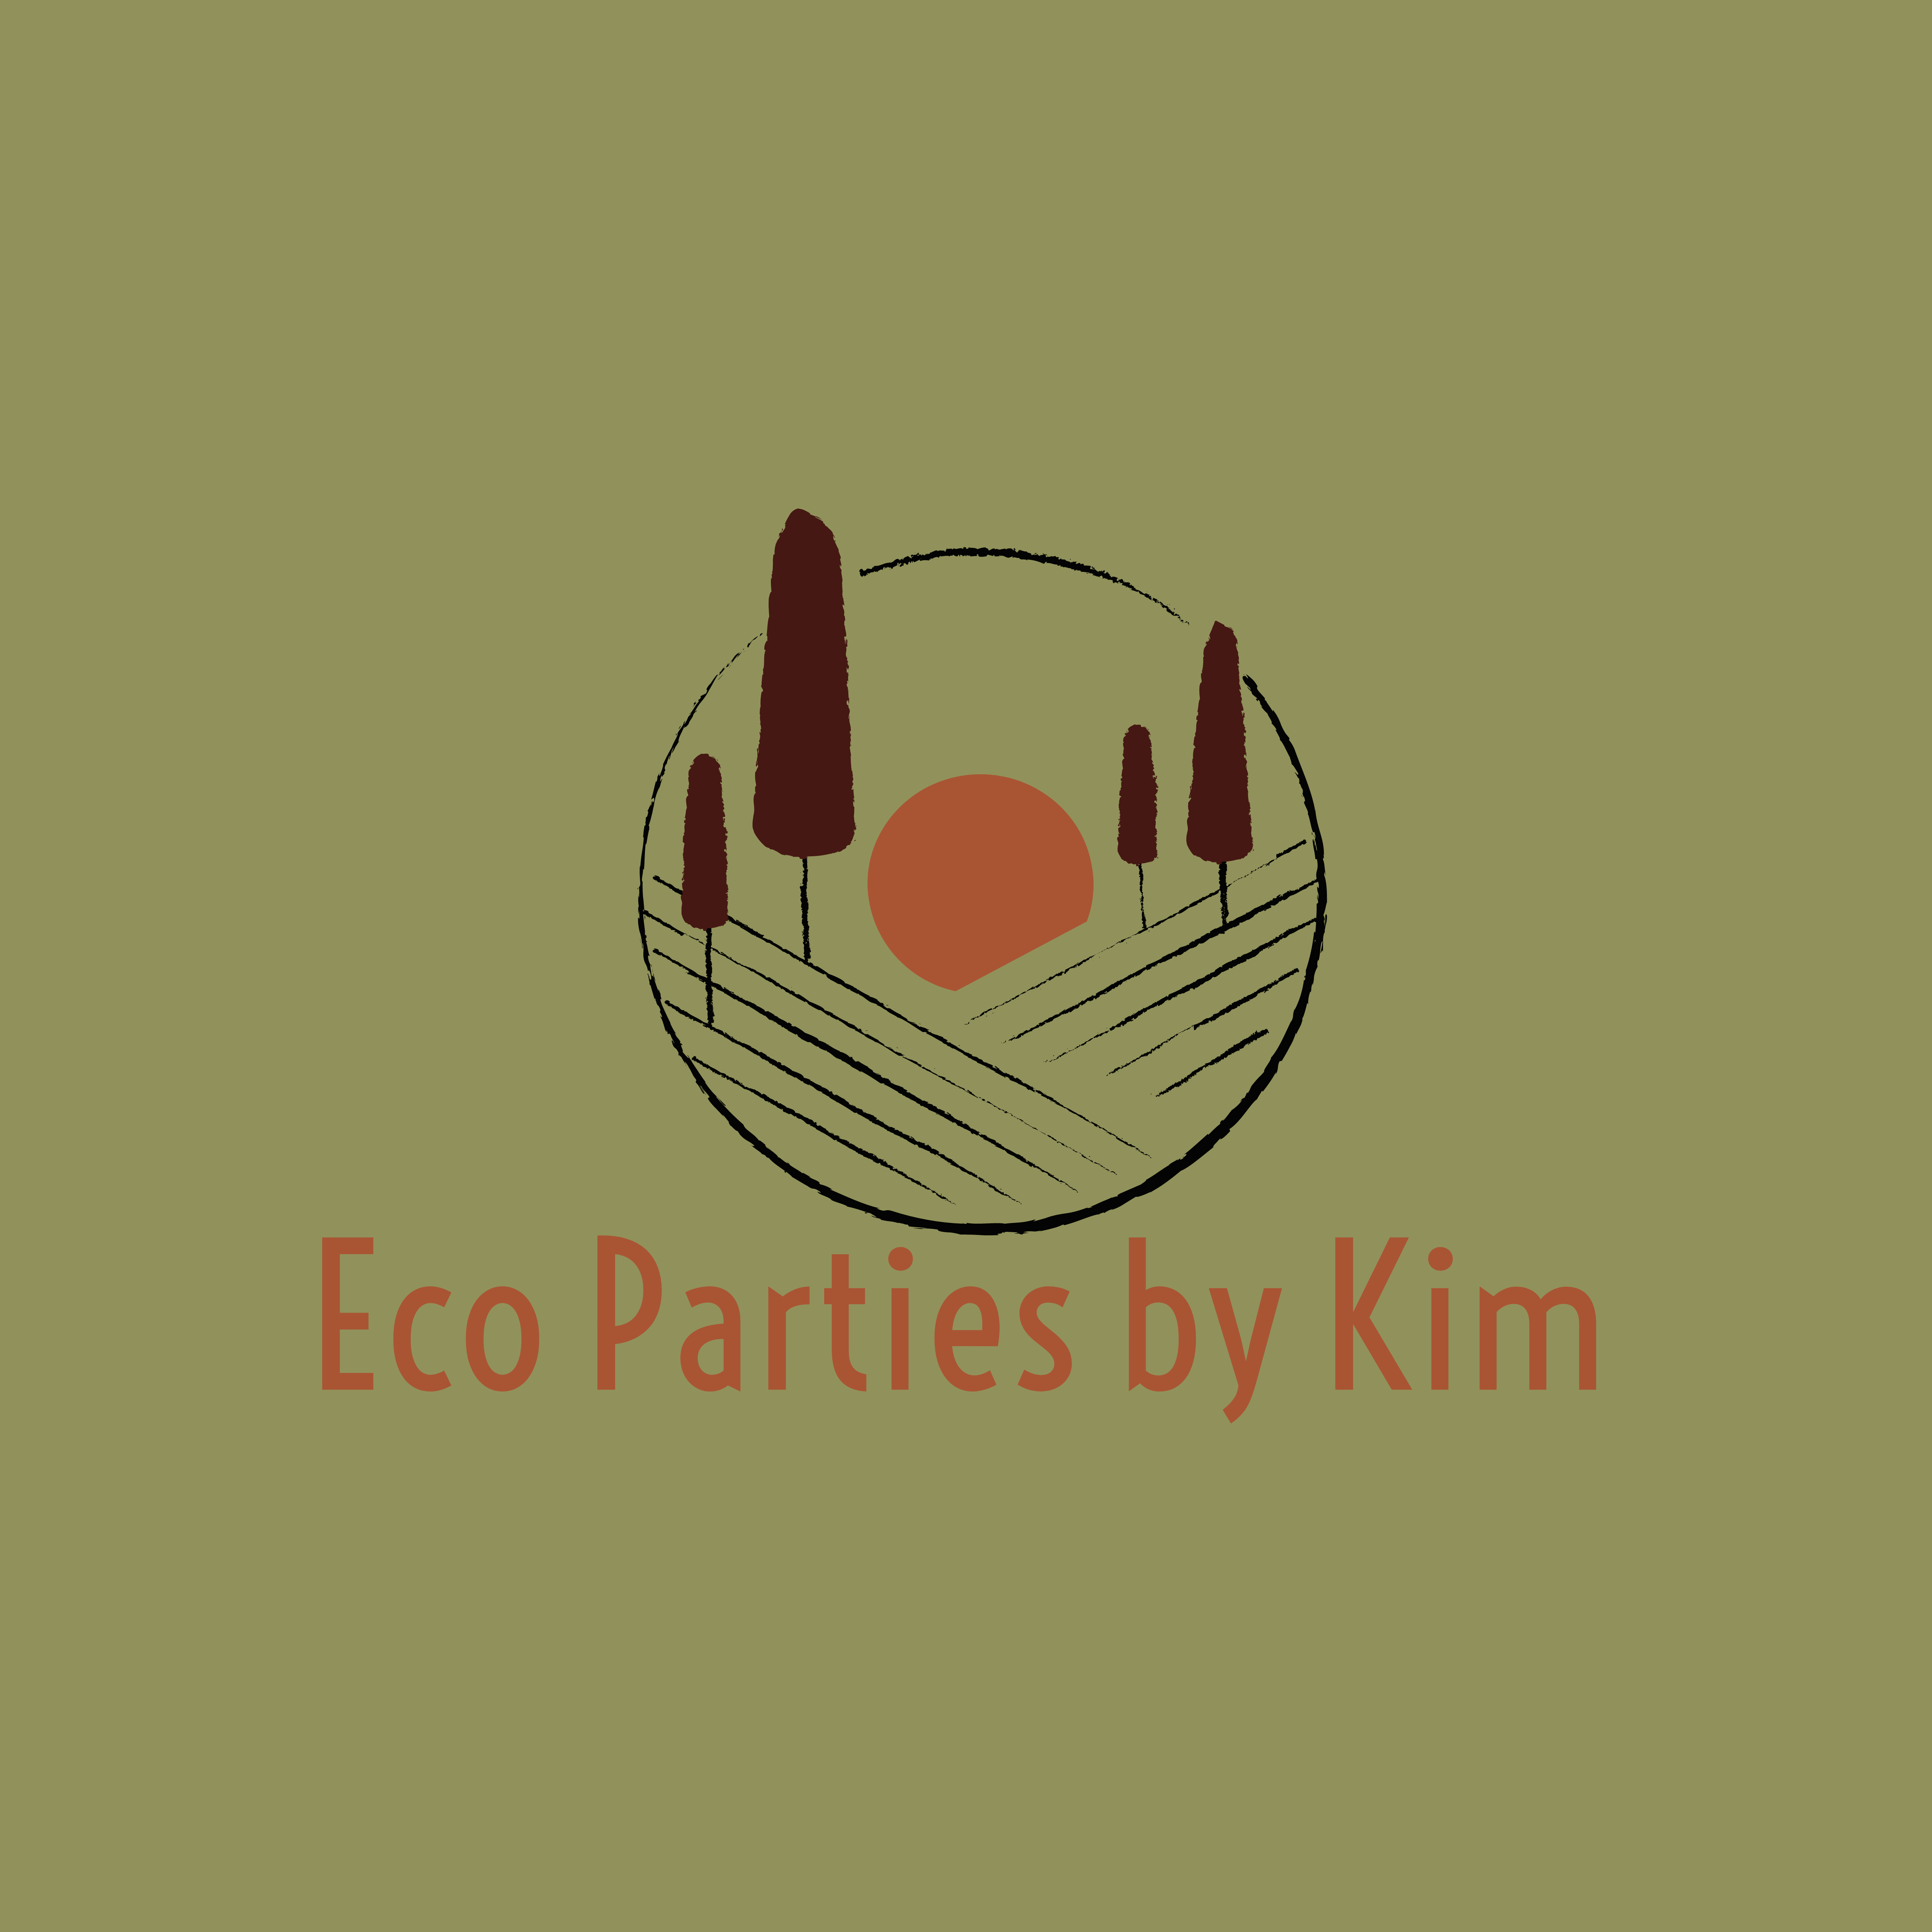 Eco Parties by Kim